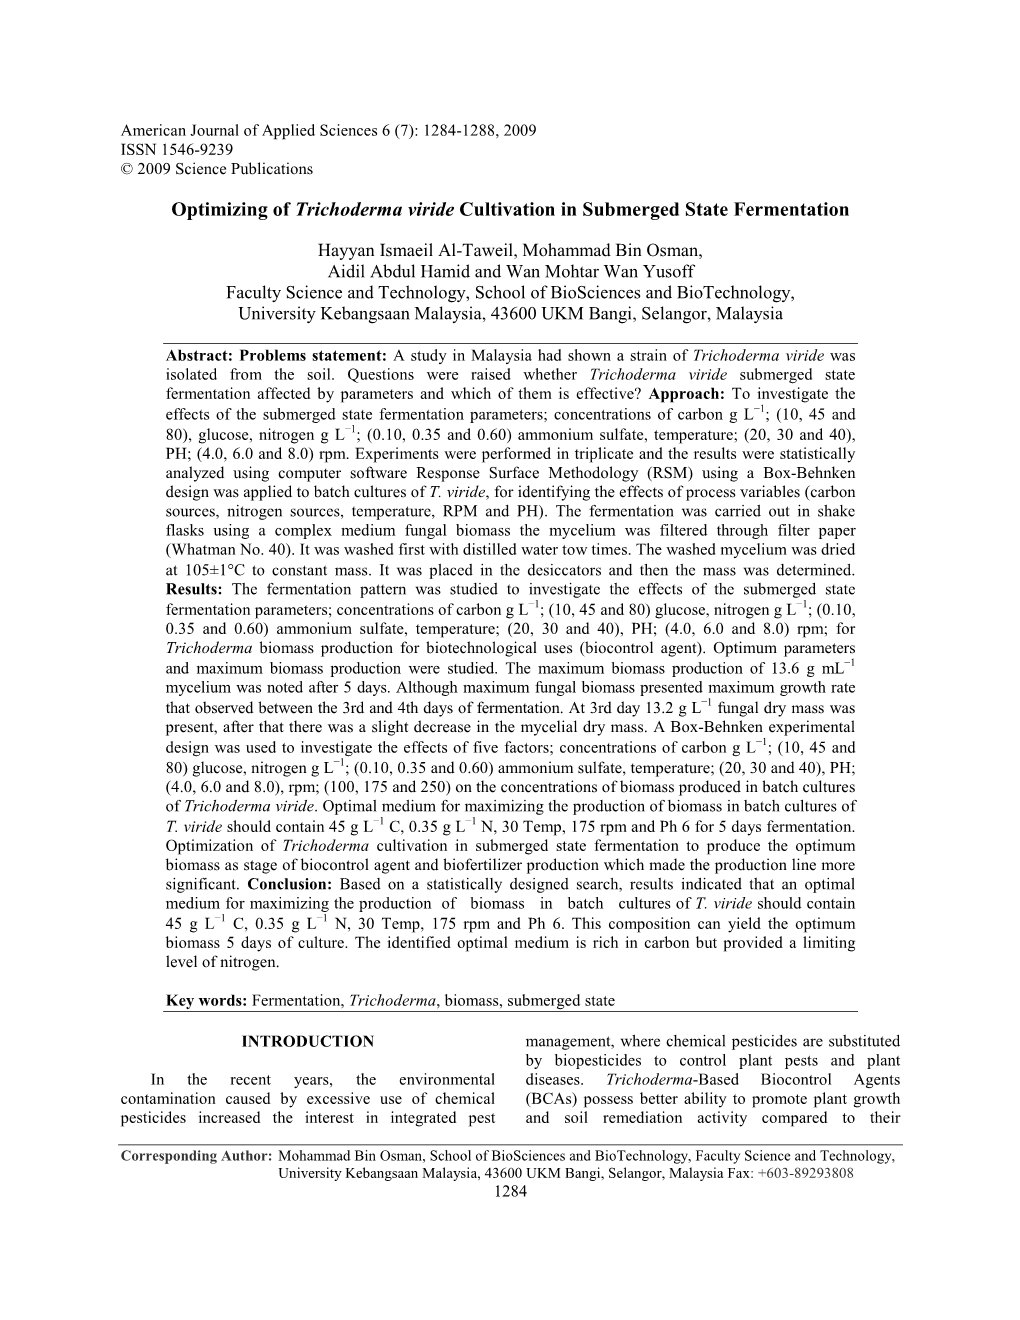 Optimizing of Trichoderma Viride Cultivation in Submerged State Fermentation